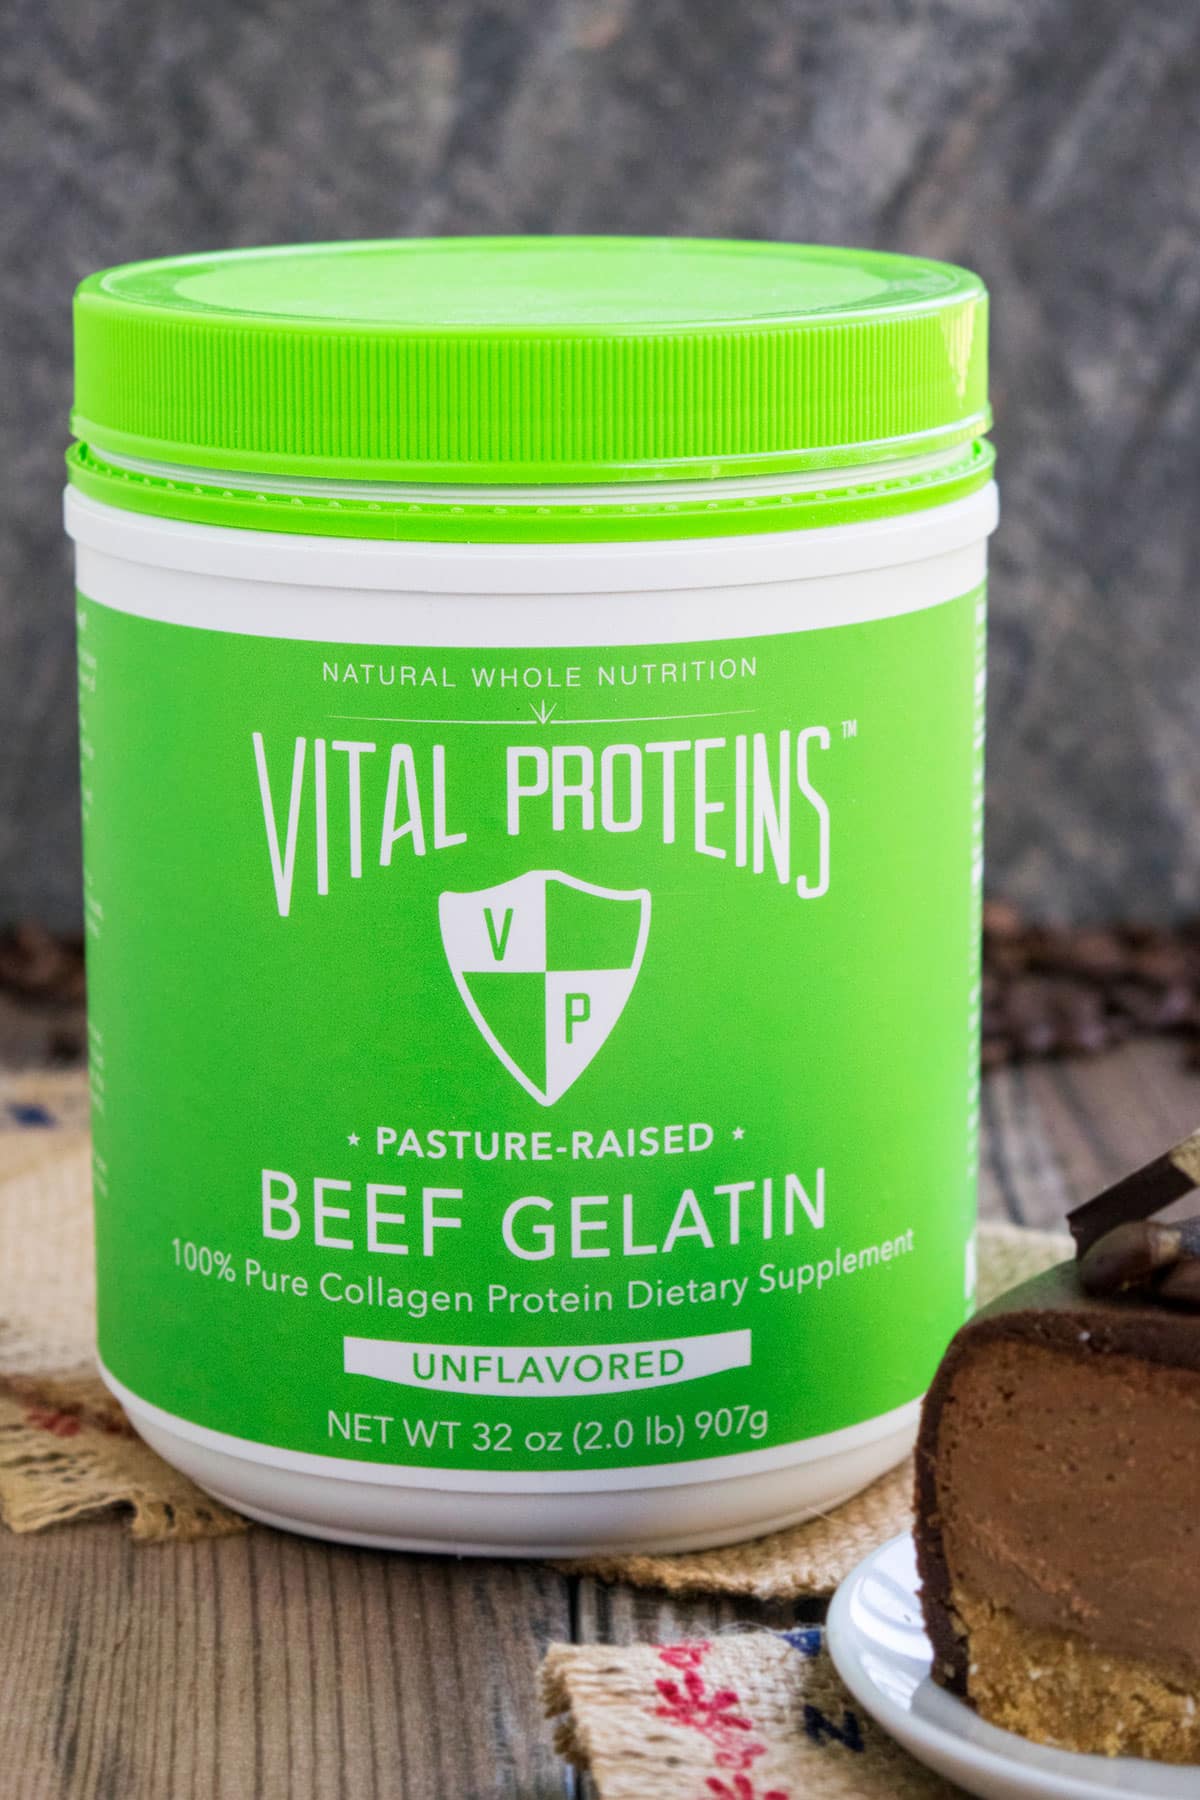 Bottle of Vital Proteins Gelatin on Rustic Background. 